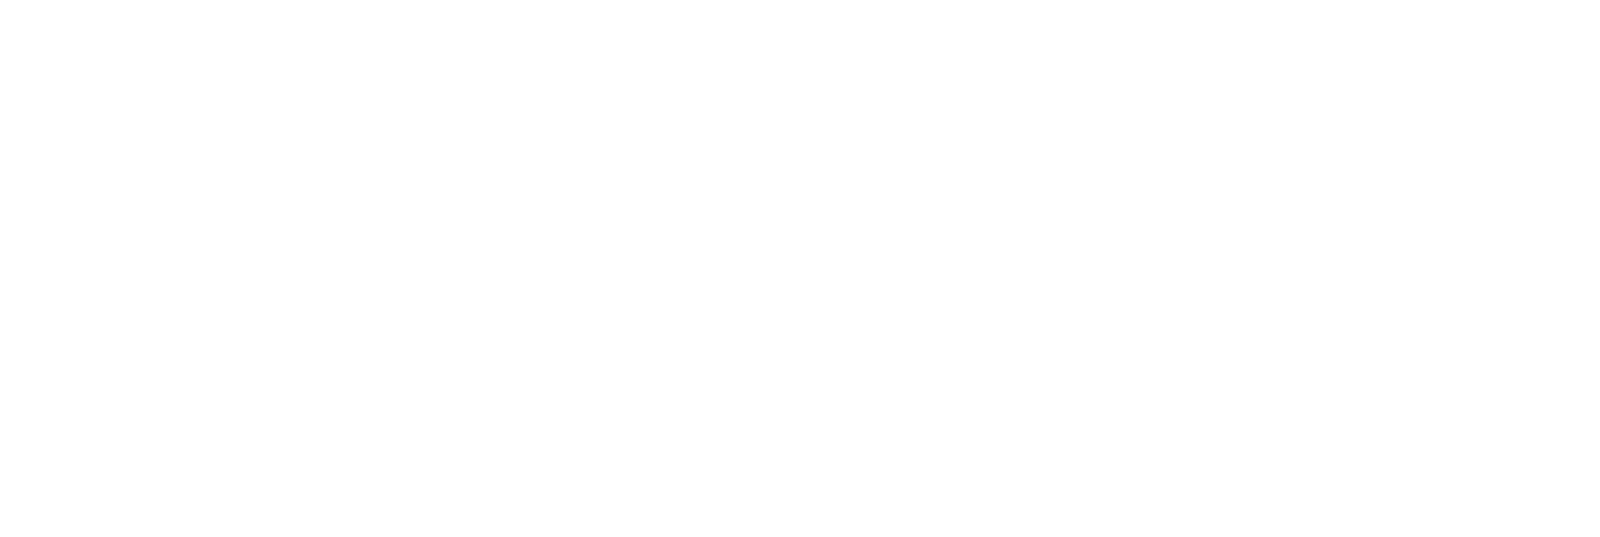 TS Pool Tile Cleaning